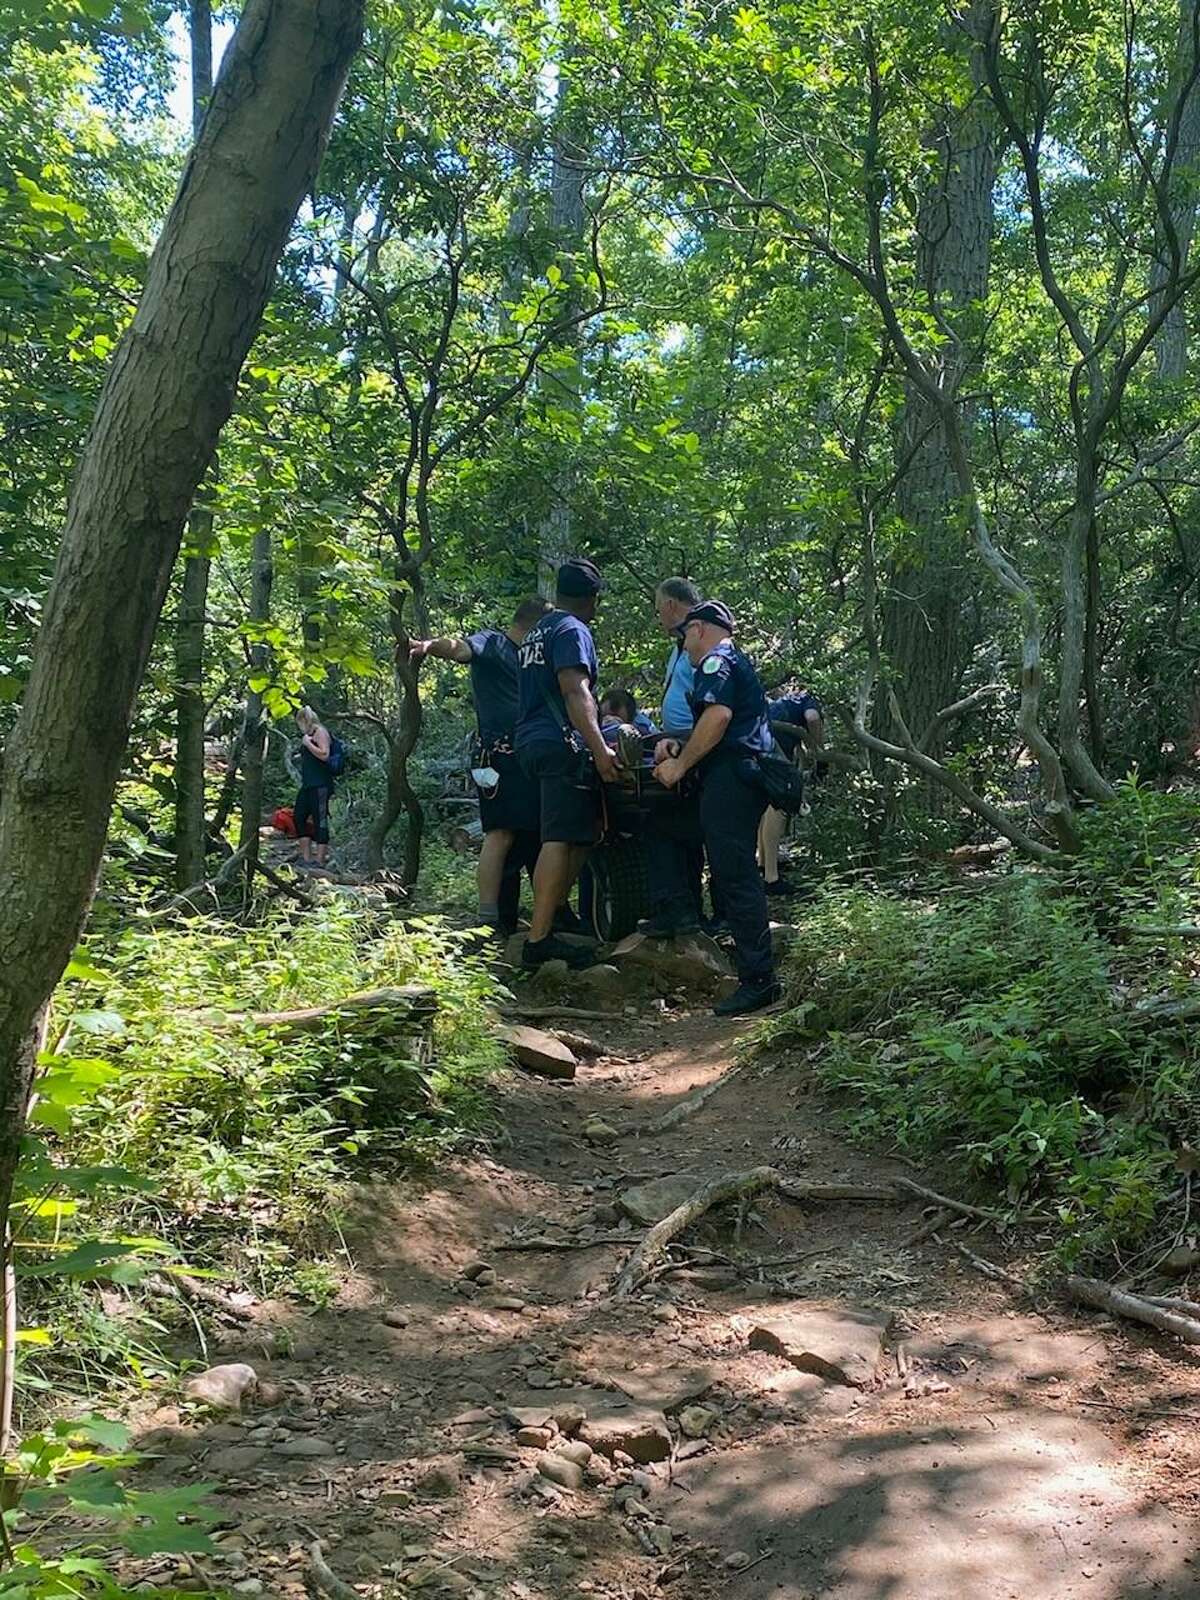 Hamden Fire personnel rescue a person at Sleeping Giant State Park in Hamden July 18, 2020